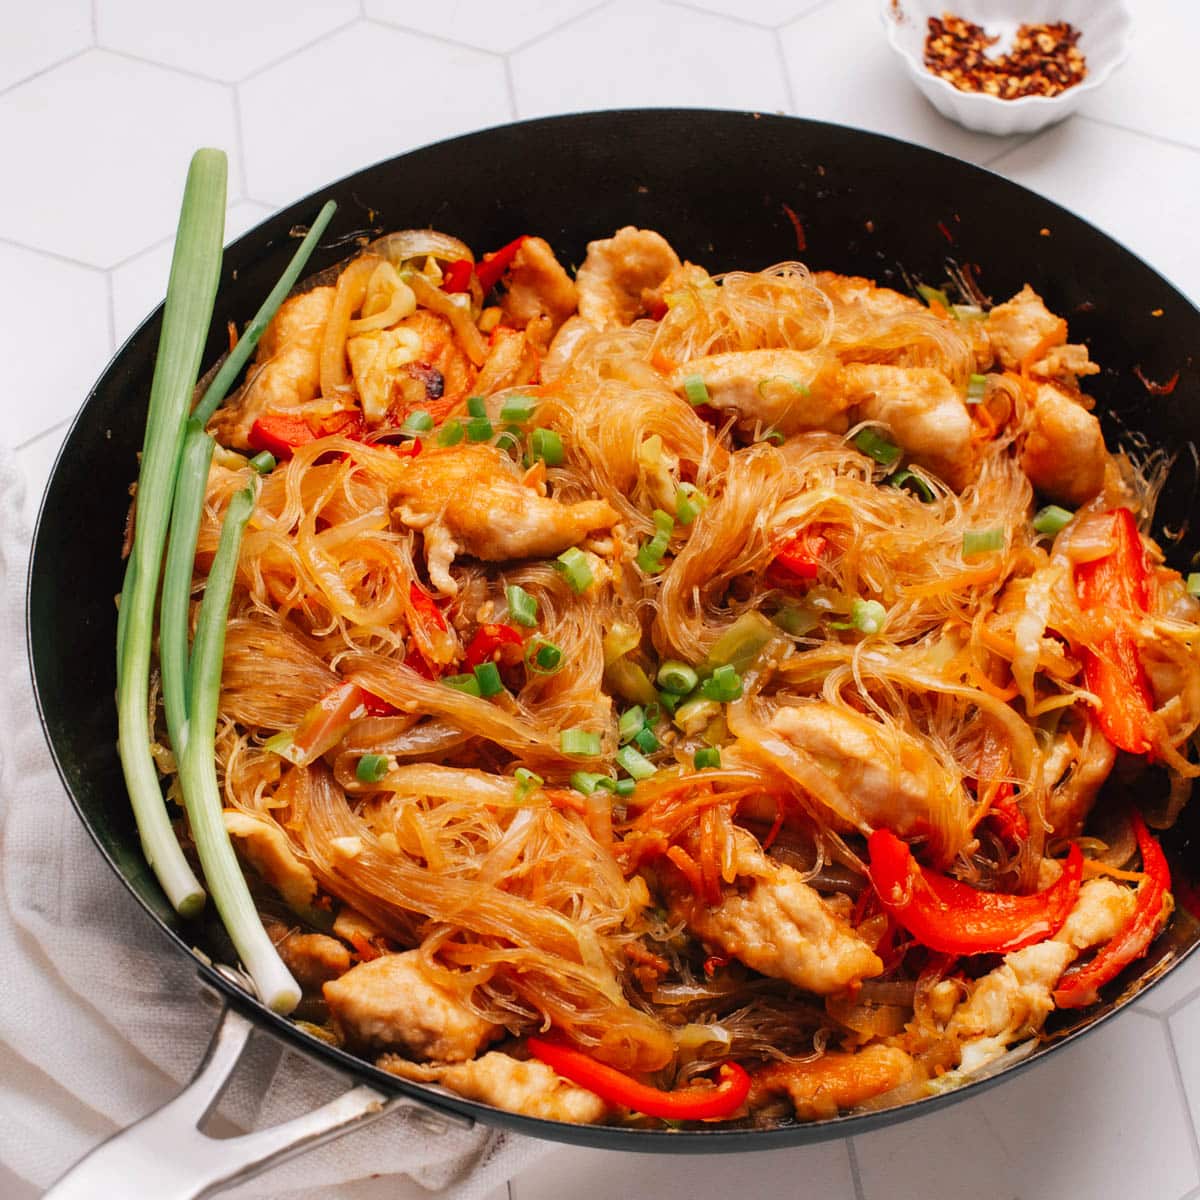 Pad Woon Sen (Thai Glass Noodle Stir Fry) is presented in a skillet, with a garnish of green onions on top.